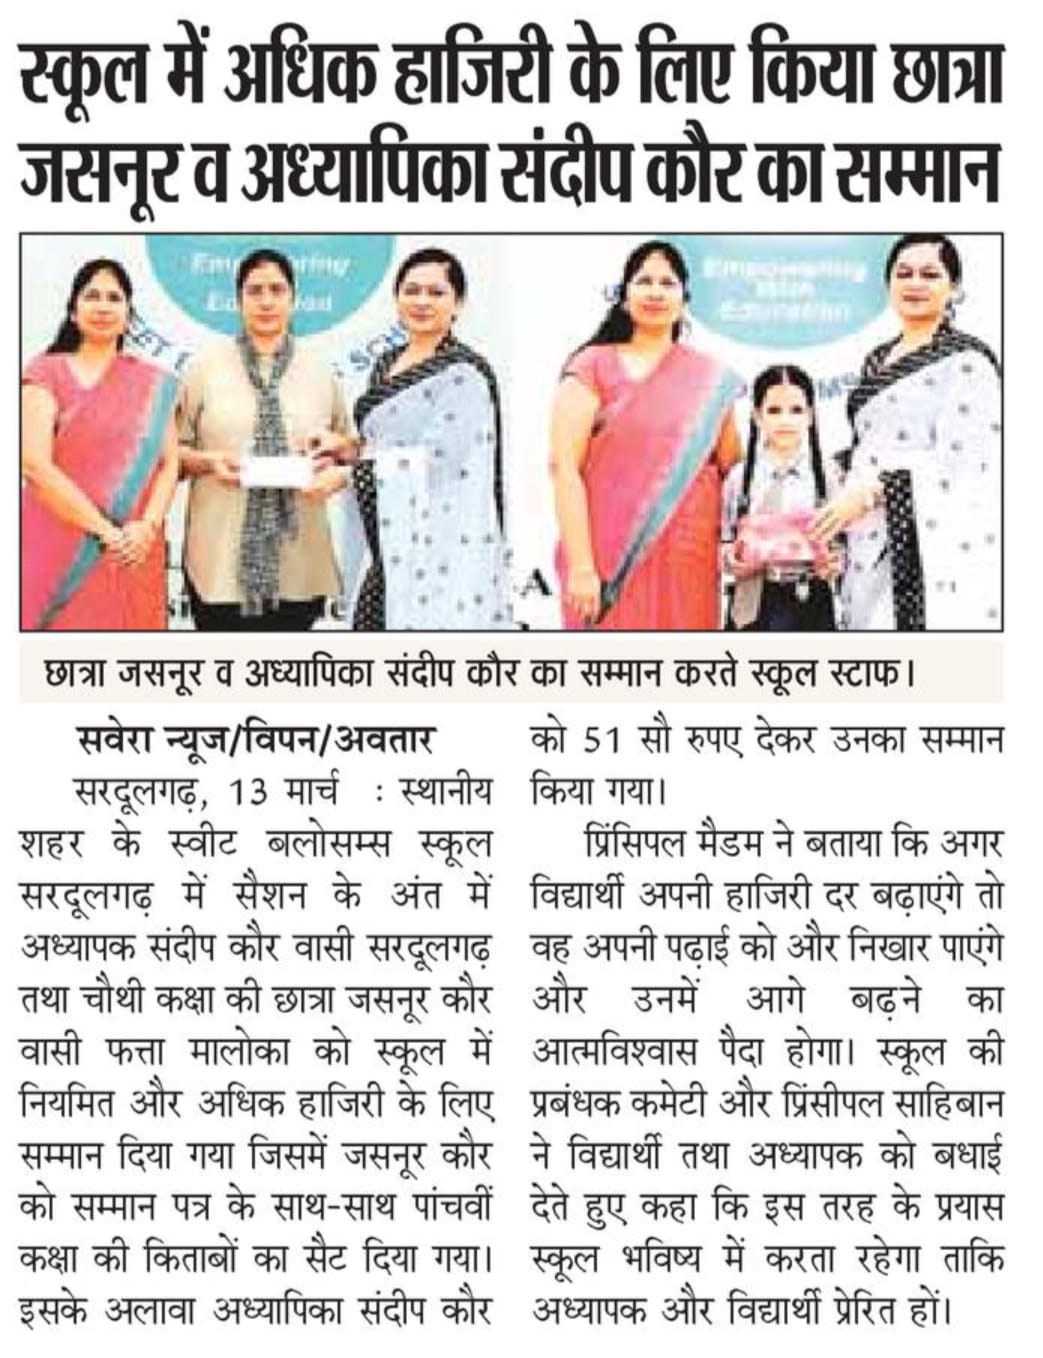 Ms. Sandeep kaur and Student Jasnoor kaur got the Award for the Highest Attendence in the School